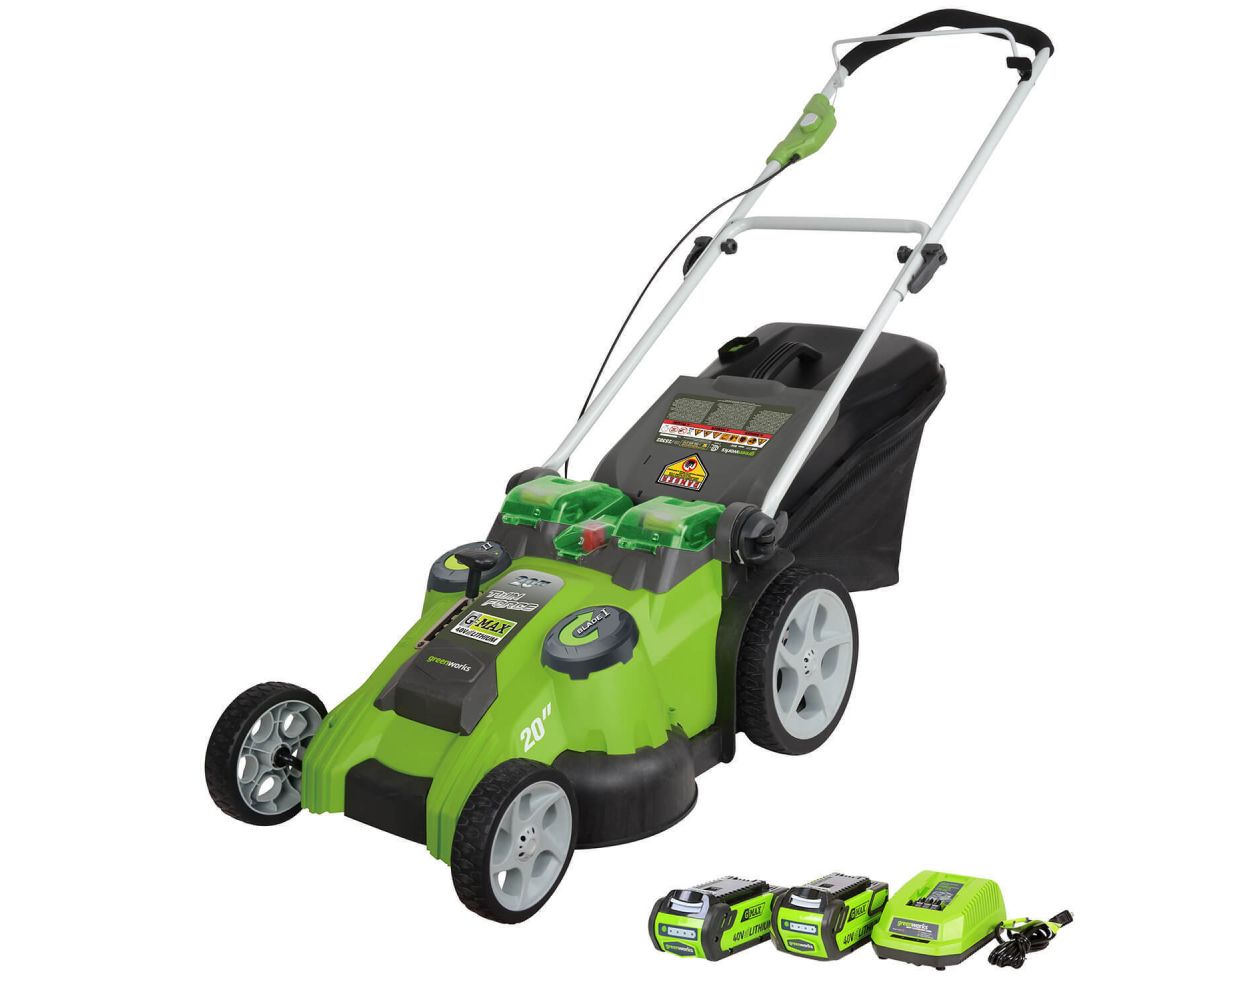 Greenworks 20-Inch 40V Twin Force Cordless Lawn Mower